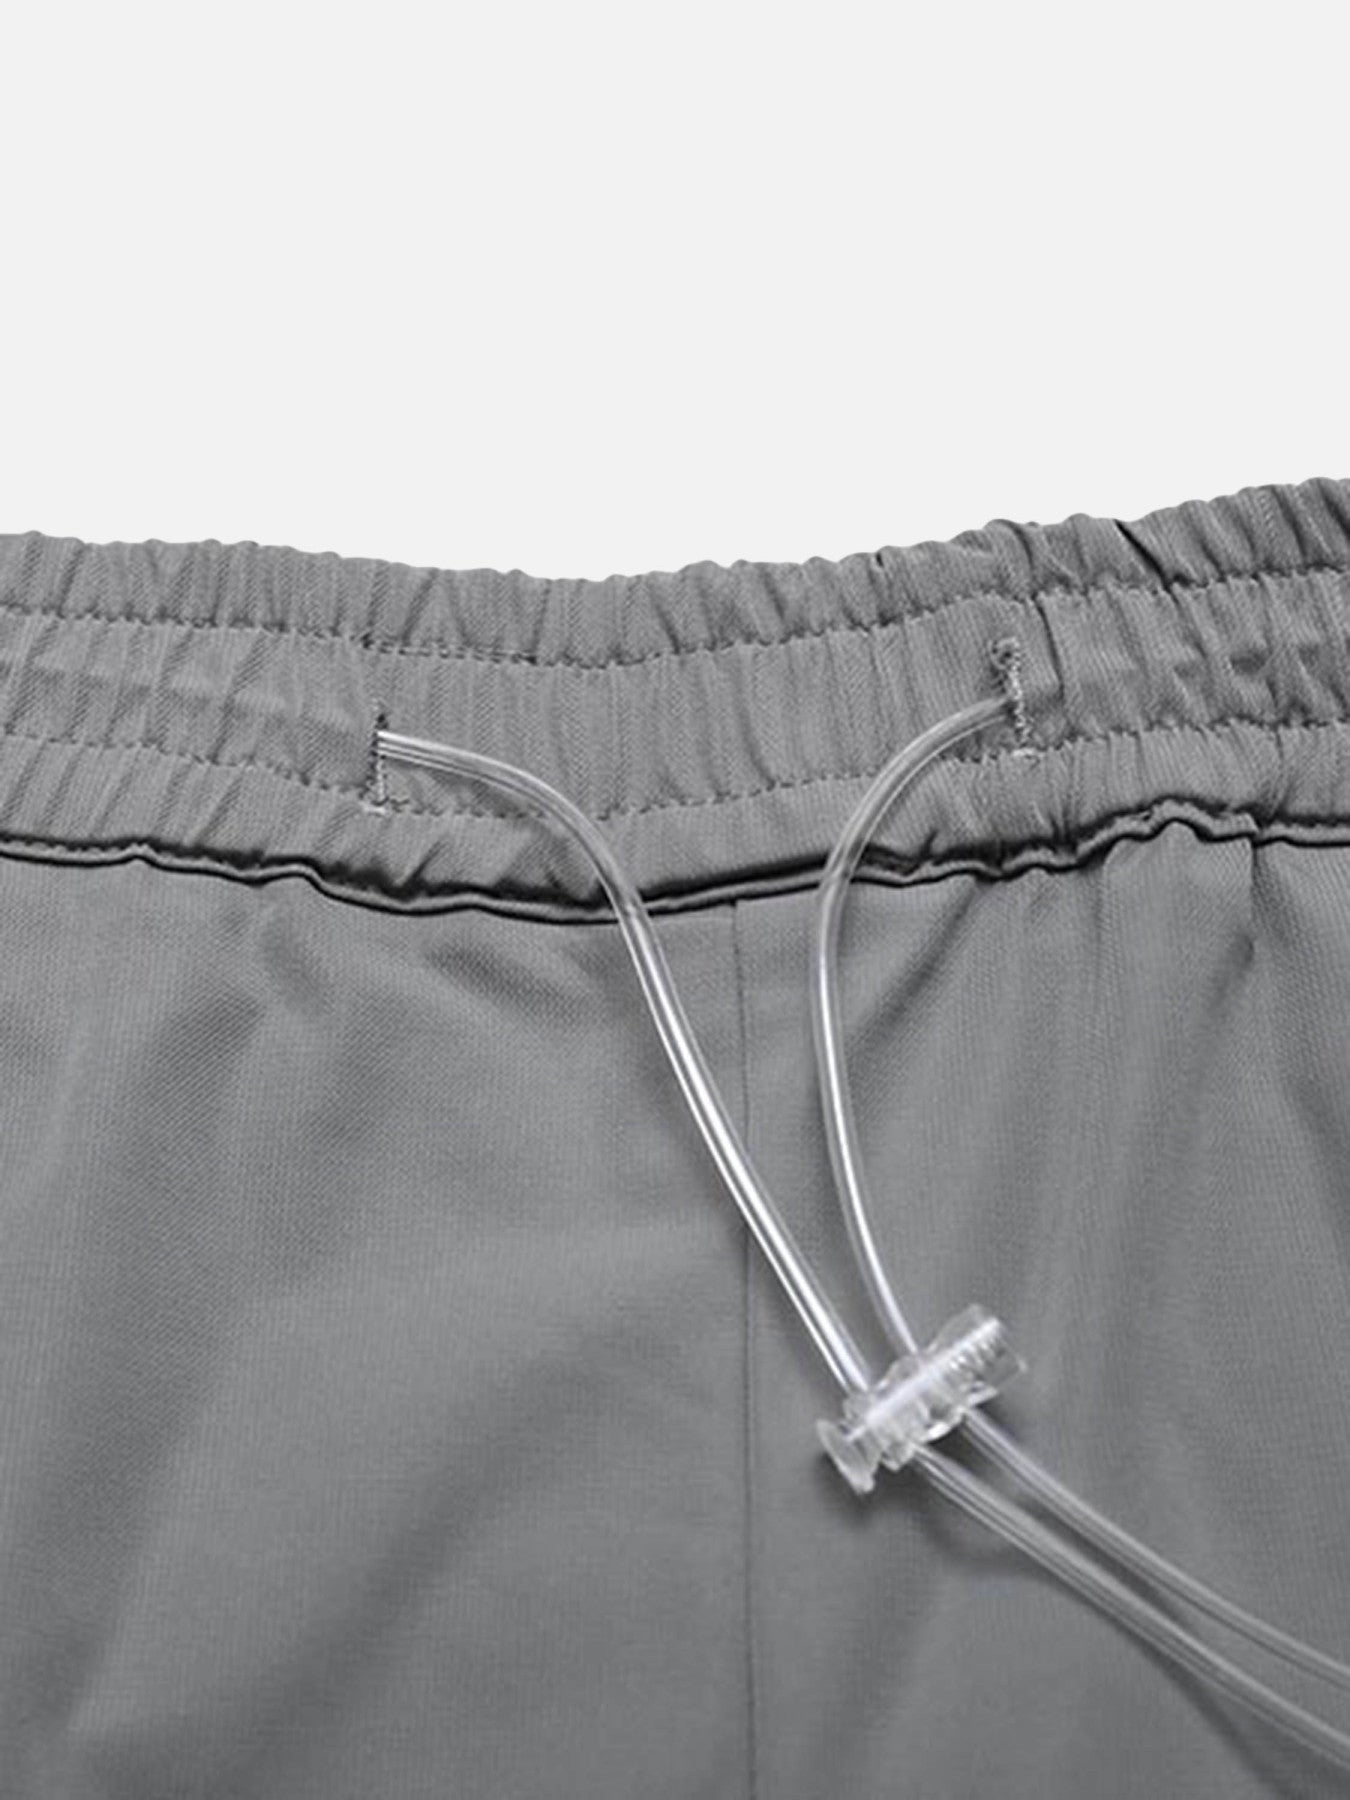 The Supermade Drawstring Pleated Sports Loose Pants